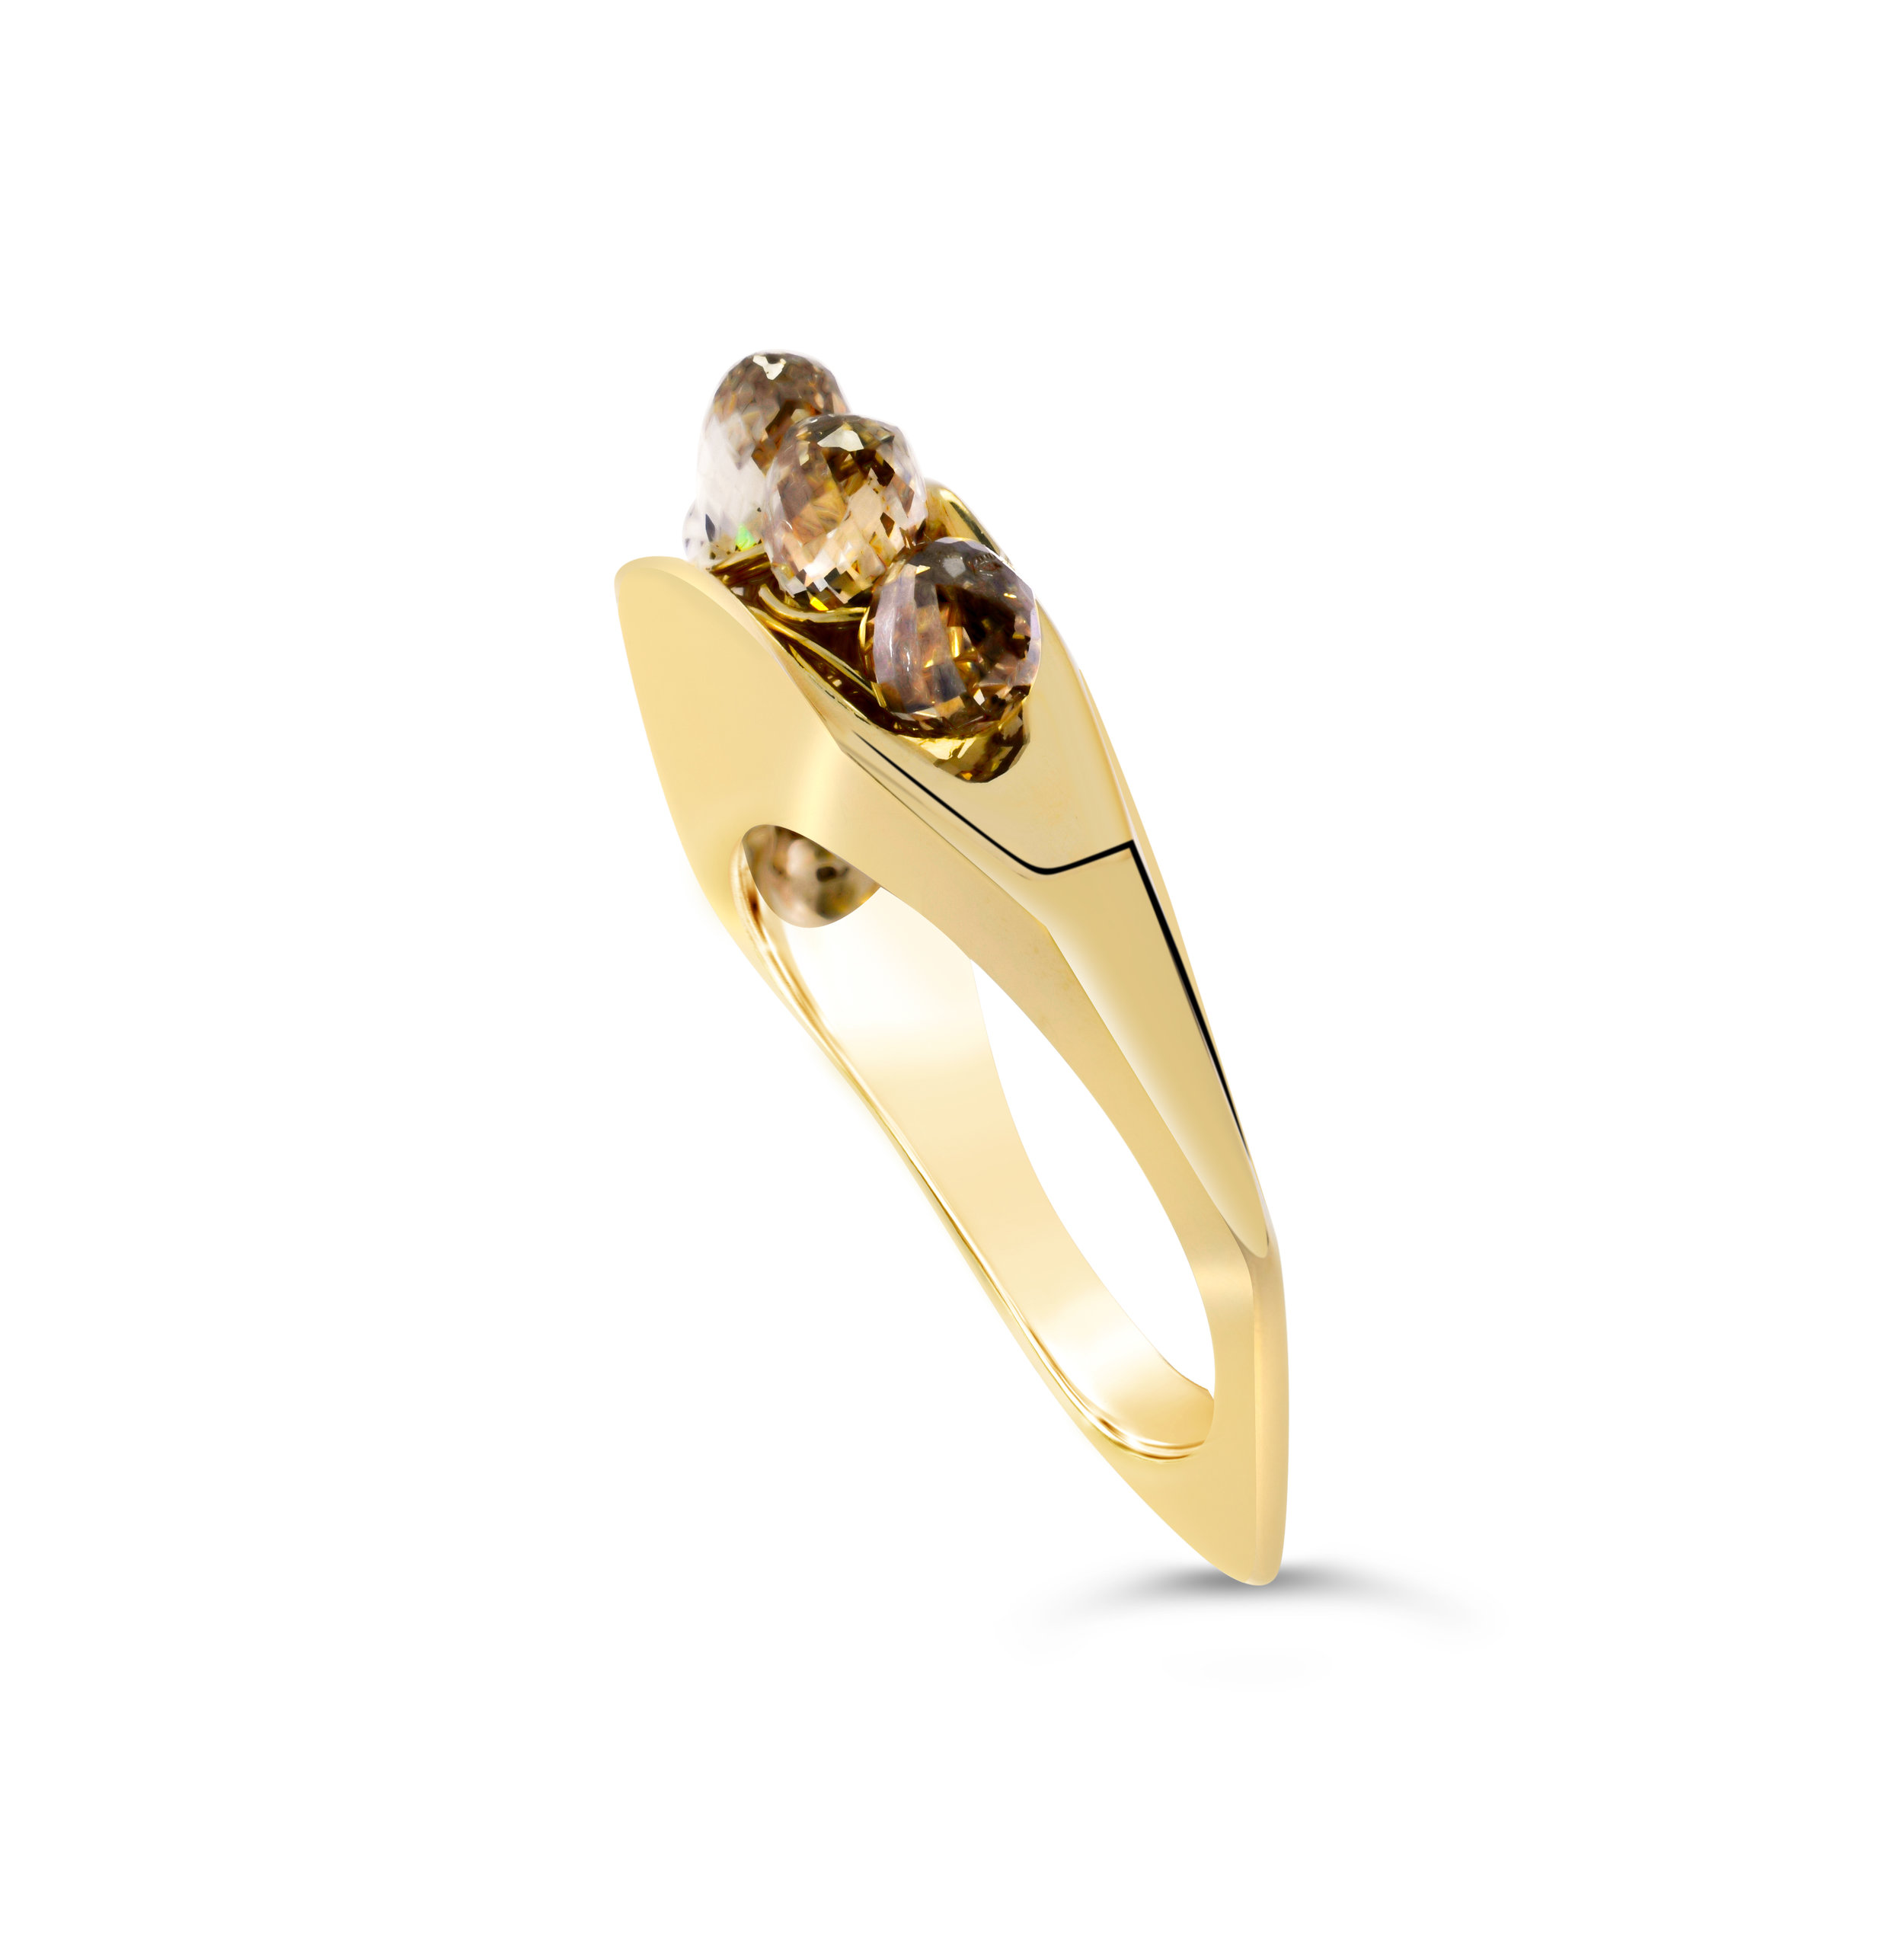 14k gold casted ring with 4 carats of champagne diamonds